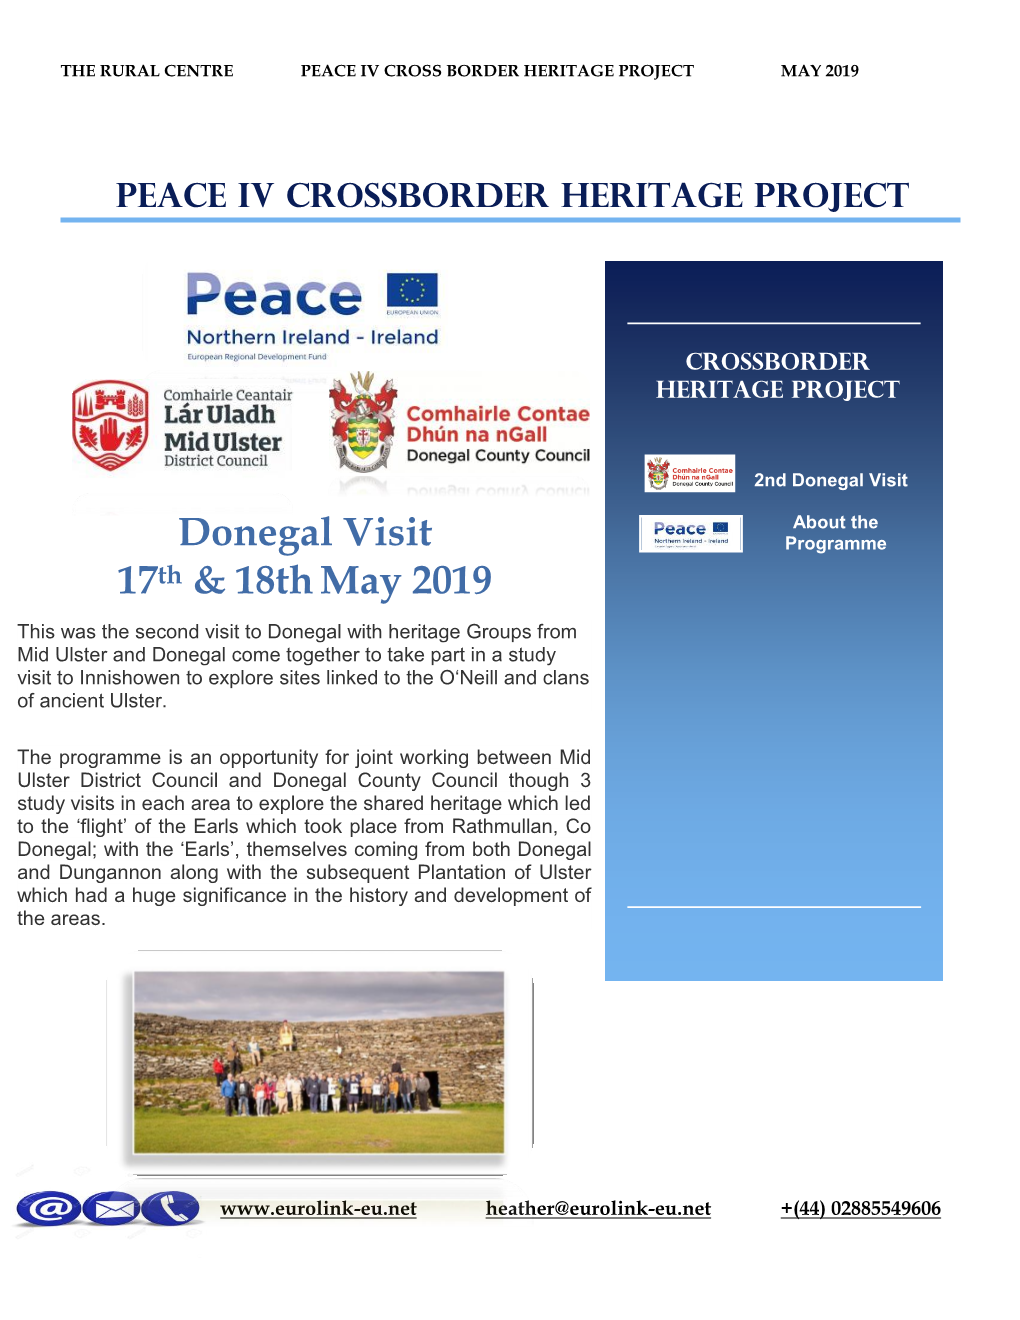 Peace IV Cross Border Heritage Project Study Visit 17 & 18 May